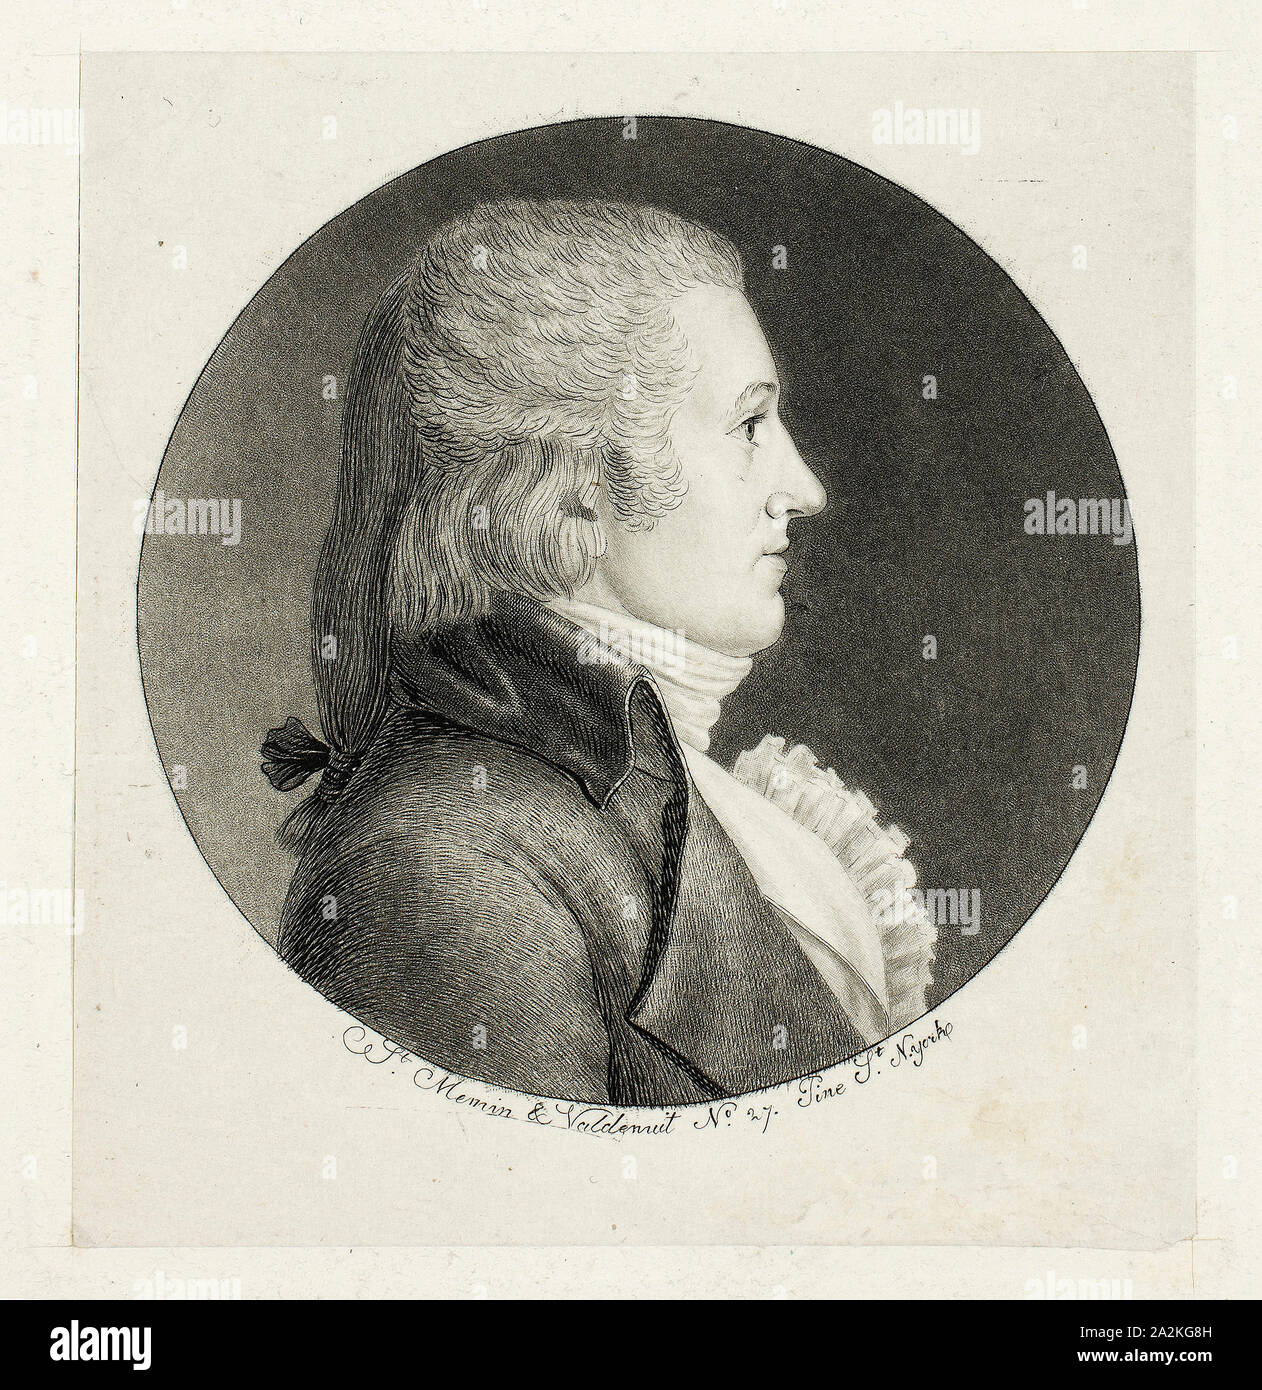 Profile Portrait, Blake, 1796–97, Charles Balthazar Julien Fevret de Saint-Mémin, French, 1770-1852, France, Mezzotint and engraving, with stipple, on ivory wove chine, laid down on off-white wove paper (chine collé), 55 × 56 mm (image), 67 × 63 mm (primary support), 206 × 148 mm (secondary support Stock Photo